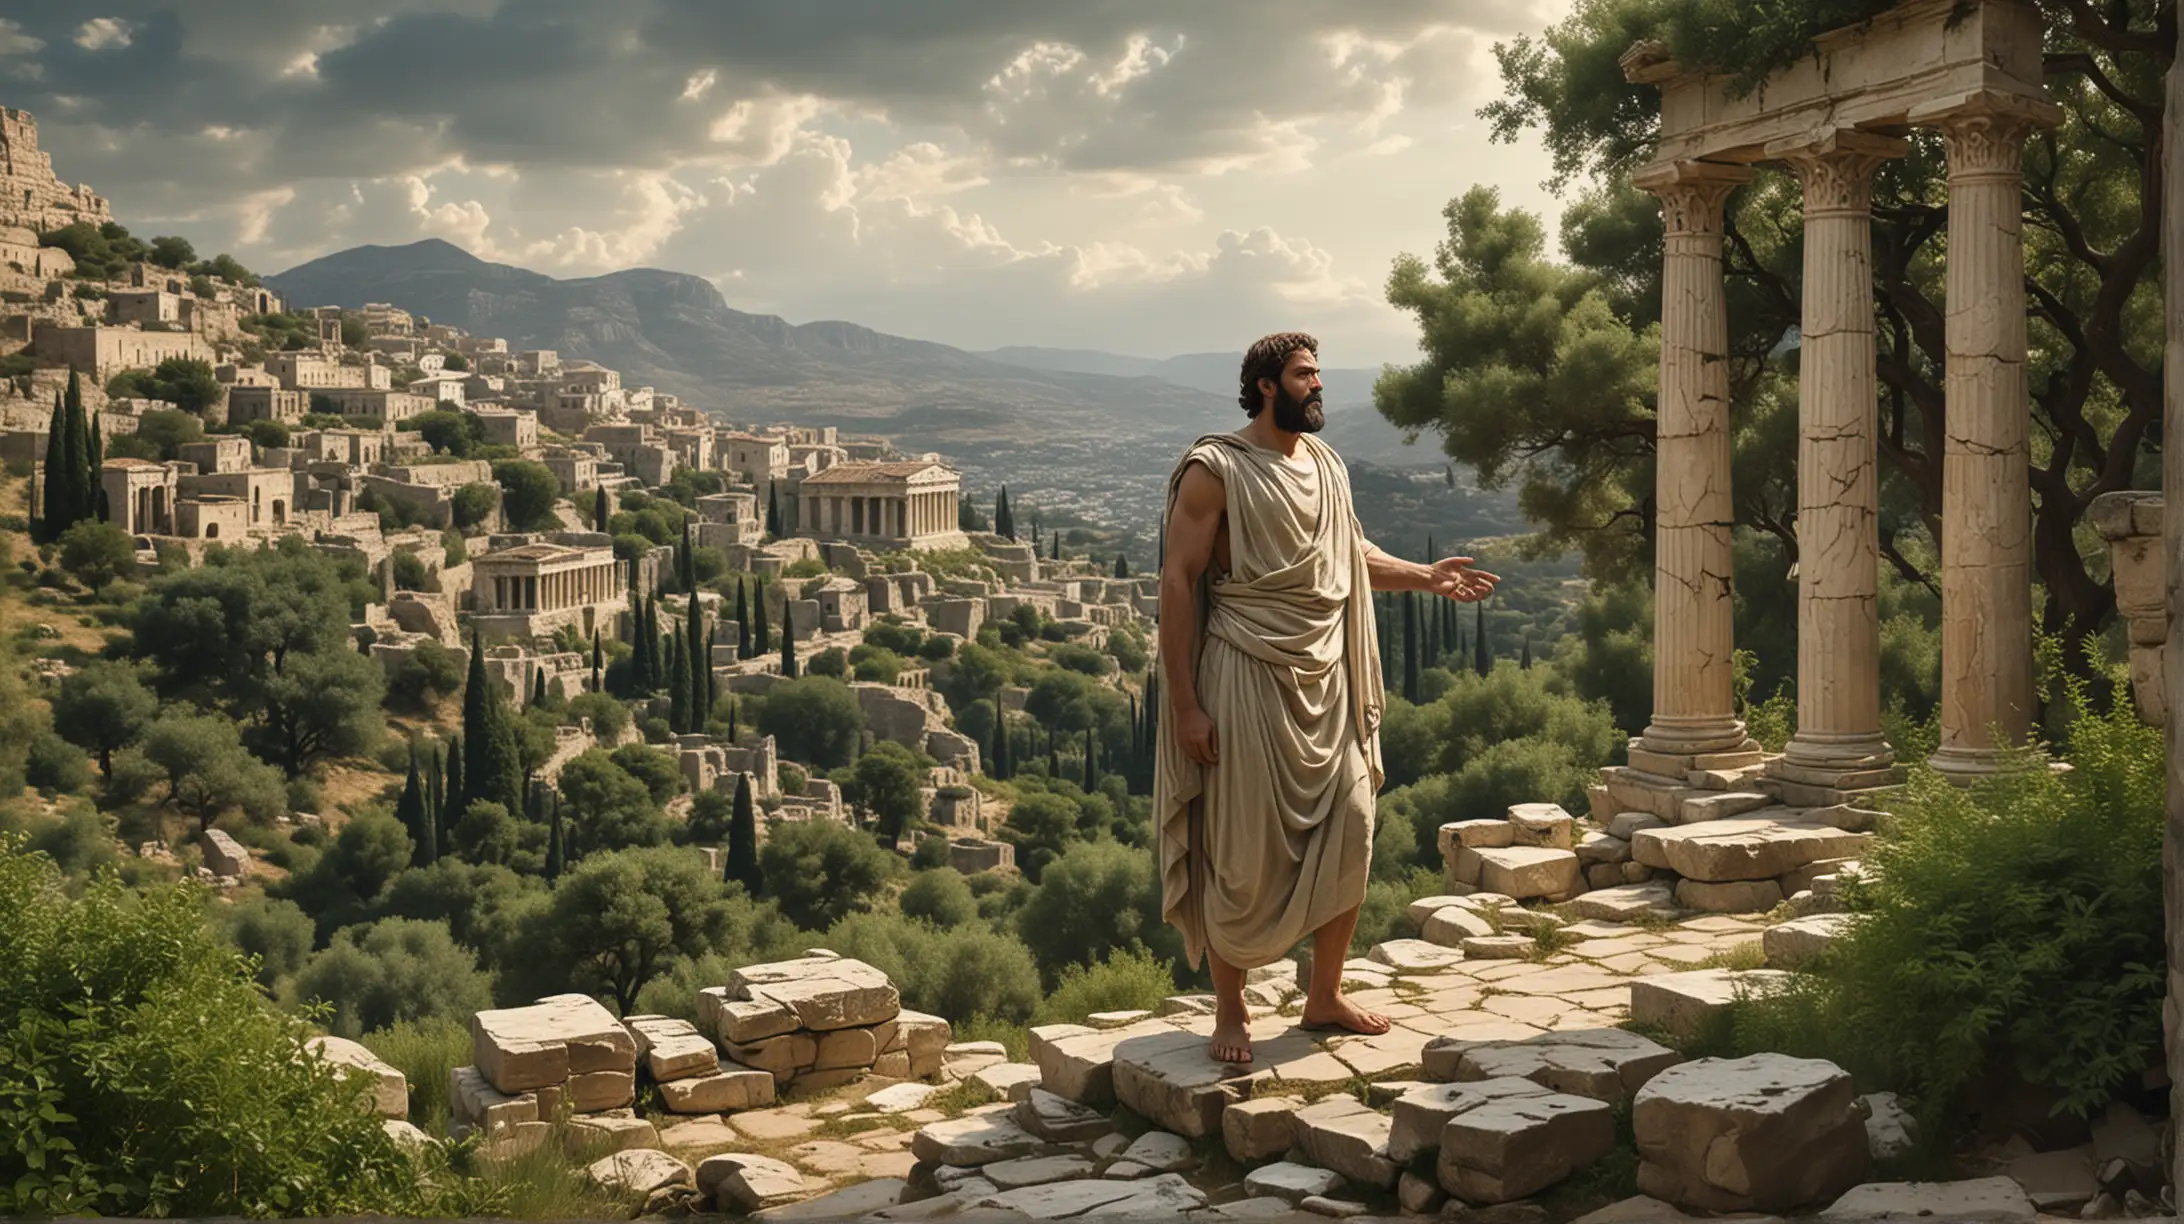 magine a serene scene with a Greek philosopher, standing tall and confident, surrounded by lush greenery and ancient ruins. He gestures with authority, emphasizing his points on Stoic principles in interpersonal relationships. Image Description: In this image, we see a realistic depiction of a Greek philosopher, possibly resembling Epictetus or Marcus Aurelius, standing amidst a picturesque landscape of verdant hills and crumbling columns. His physique exudes strength and wisdom, with a determined expression as he speaks passionately about Stoic ideals in relationships.